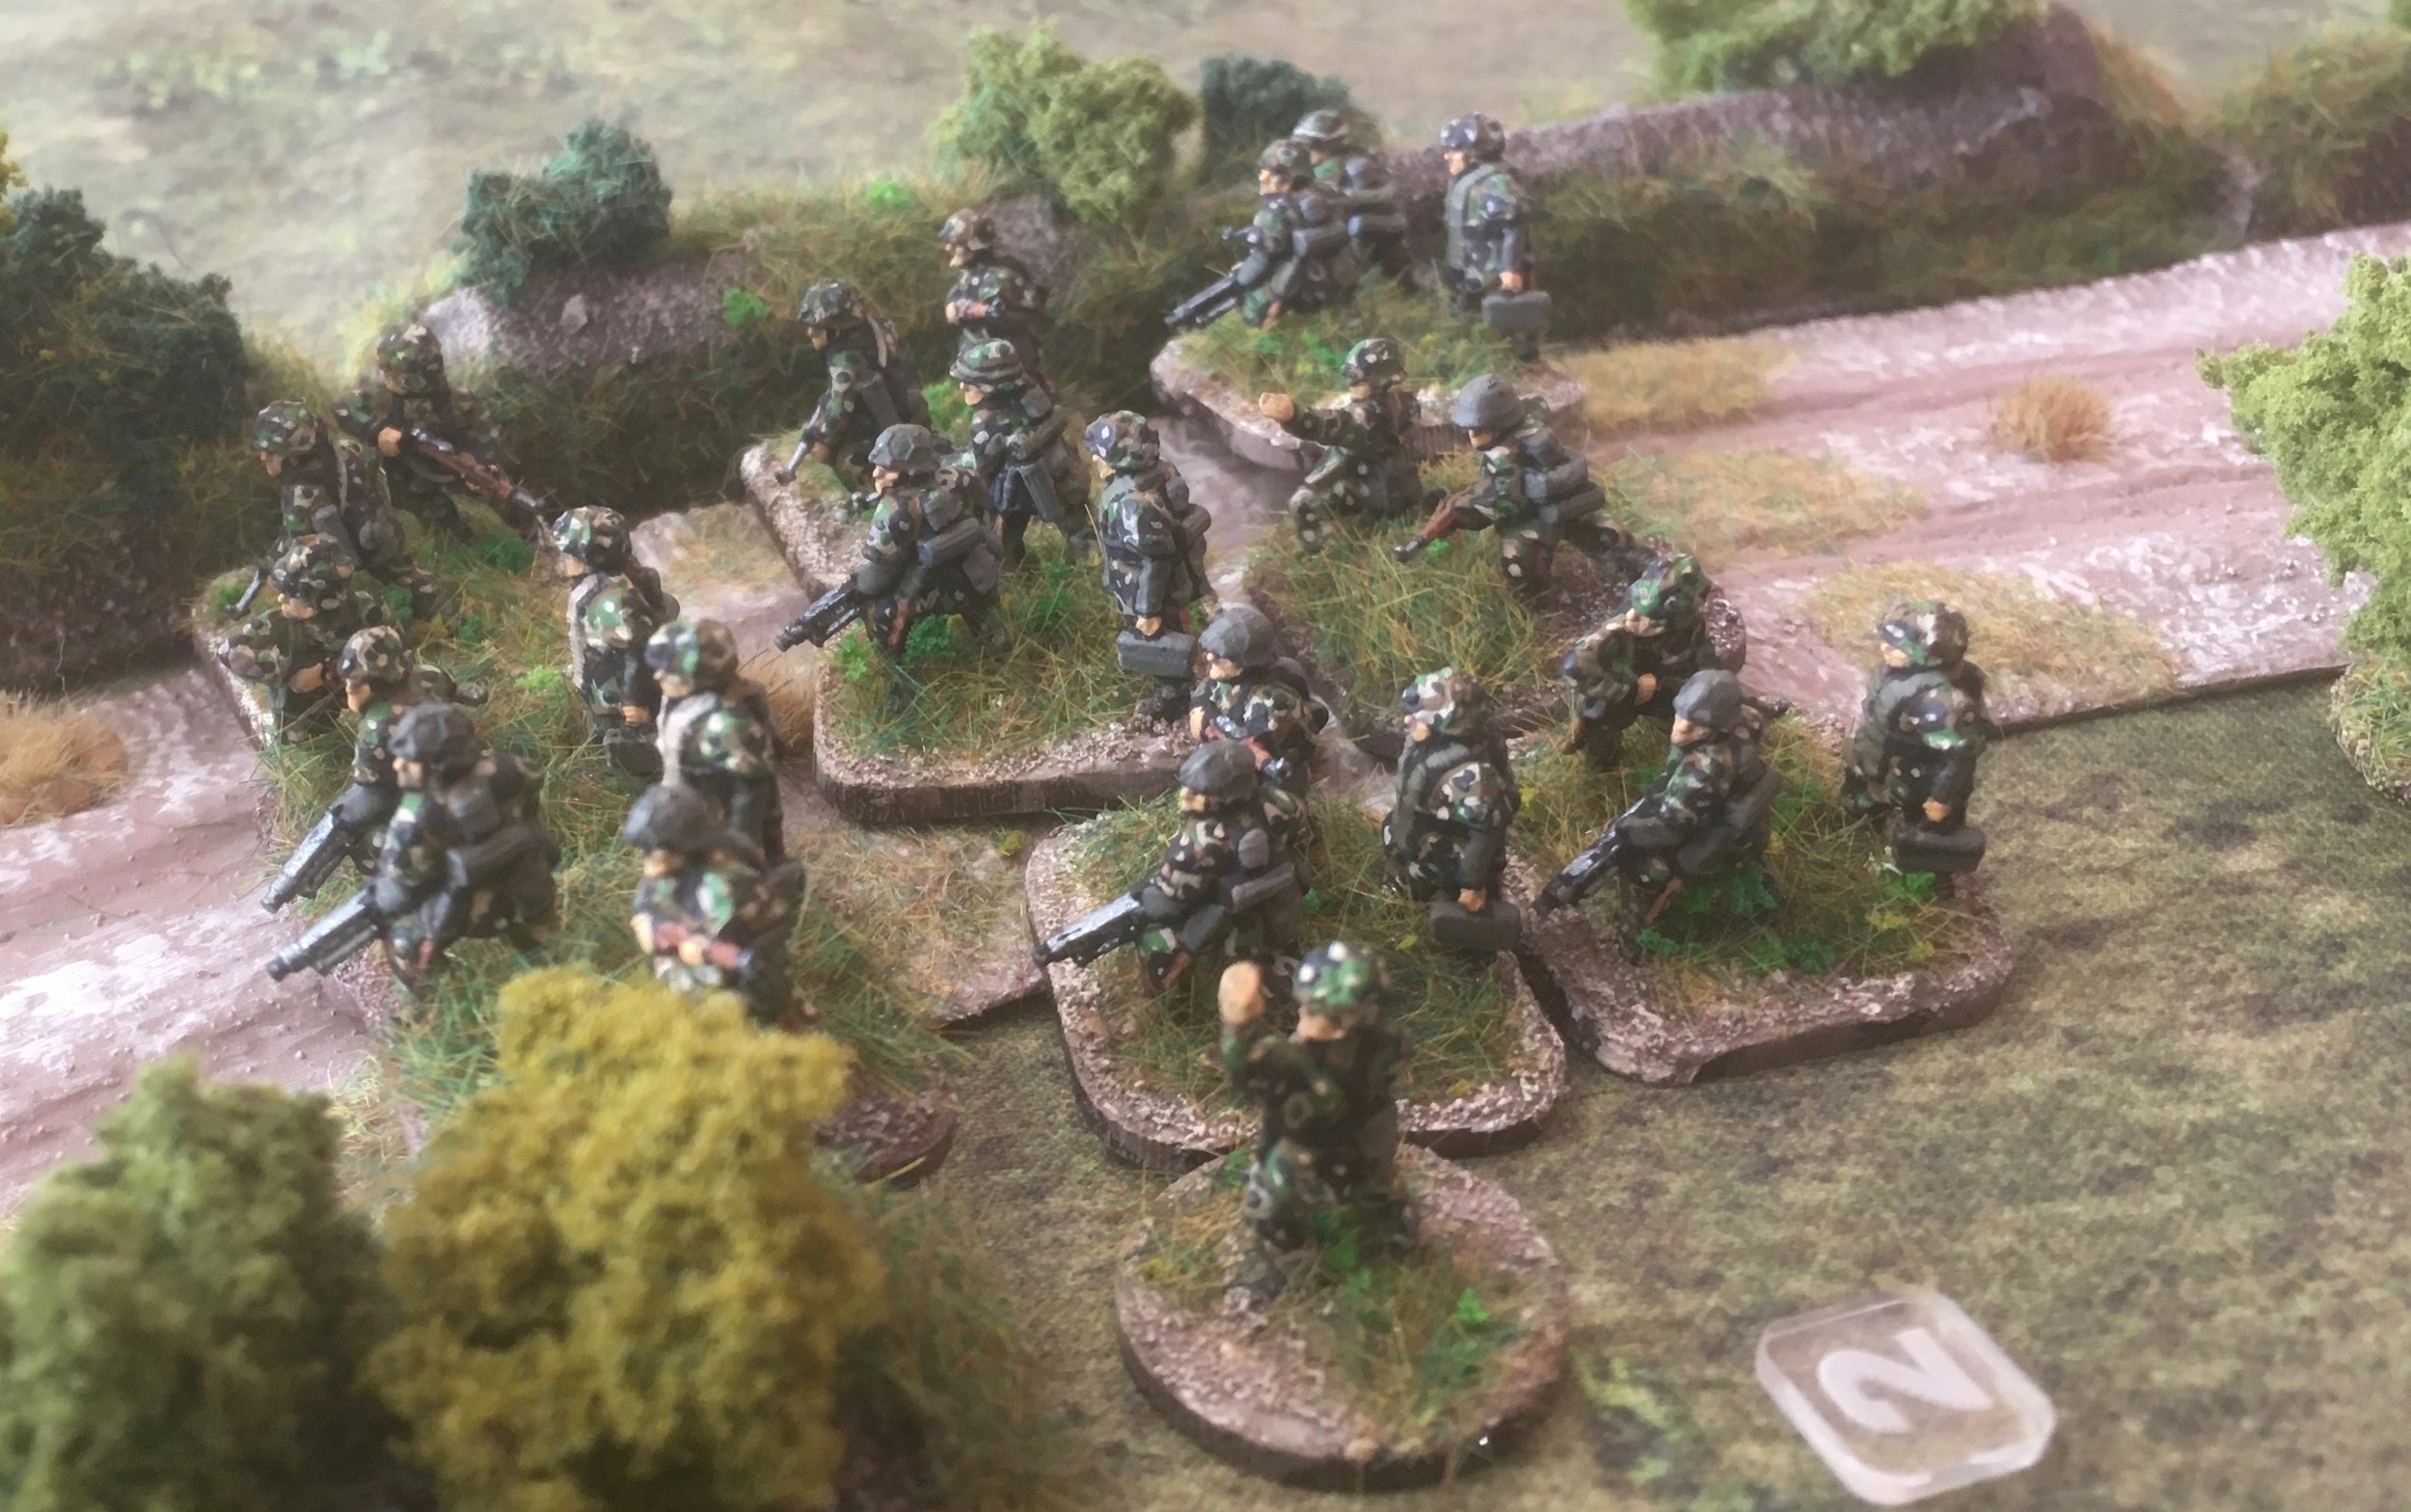 With no sign of the British the lads from Das Reich advanced cautiously towards Rauray...